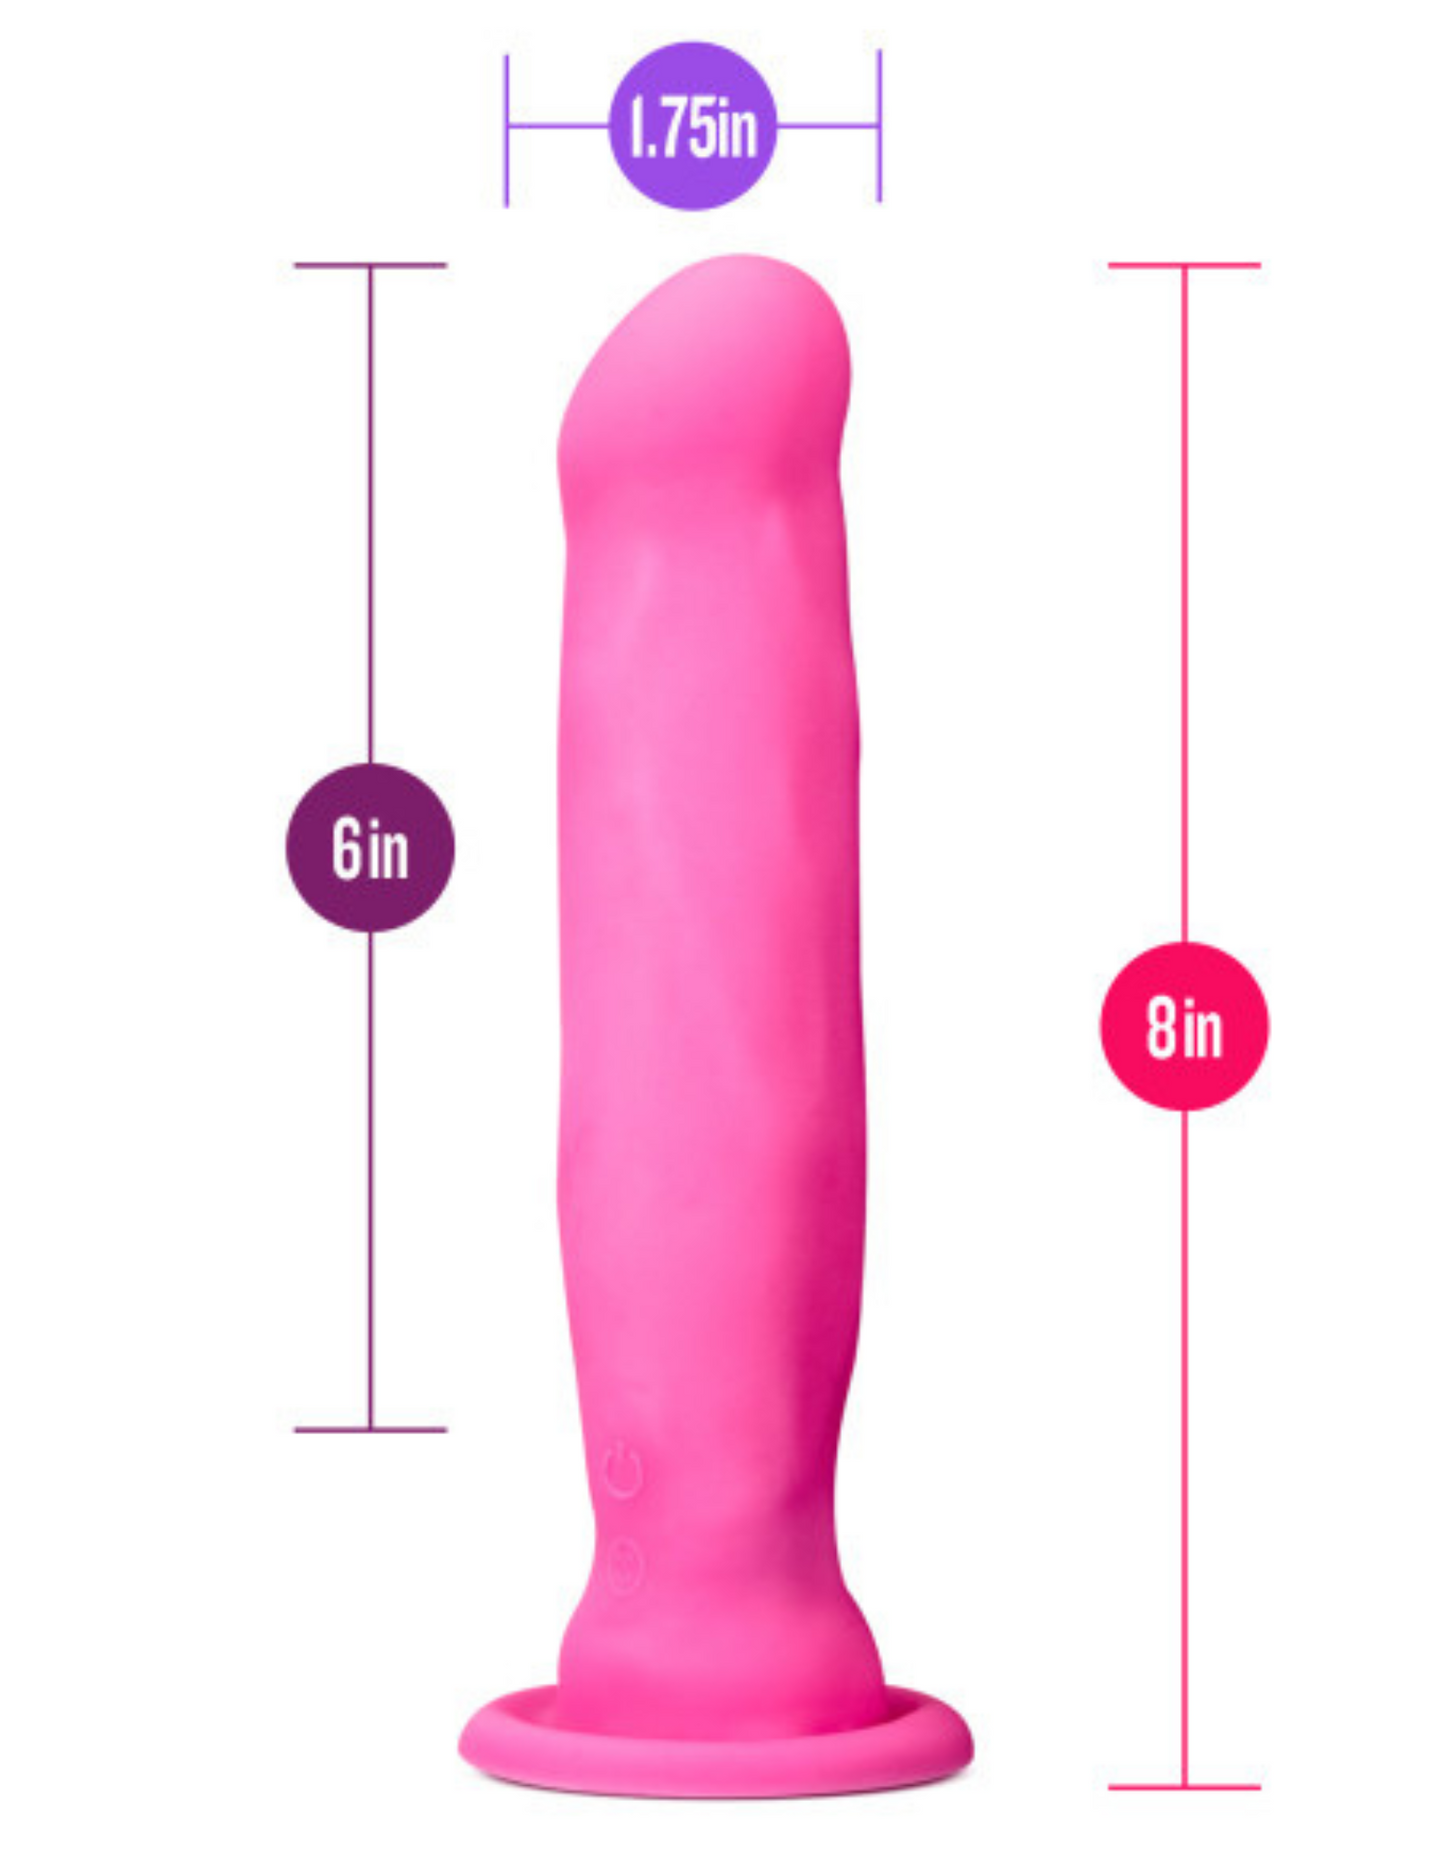 Diagram shows the dimensions of the Havana Impressions Vibrator from Blush (pink).